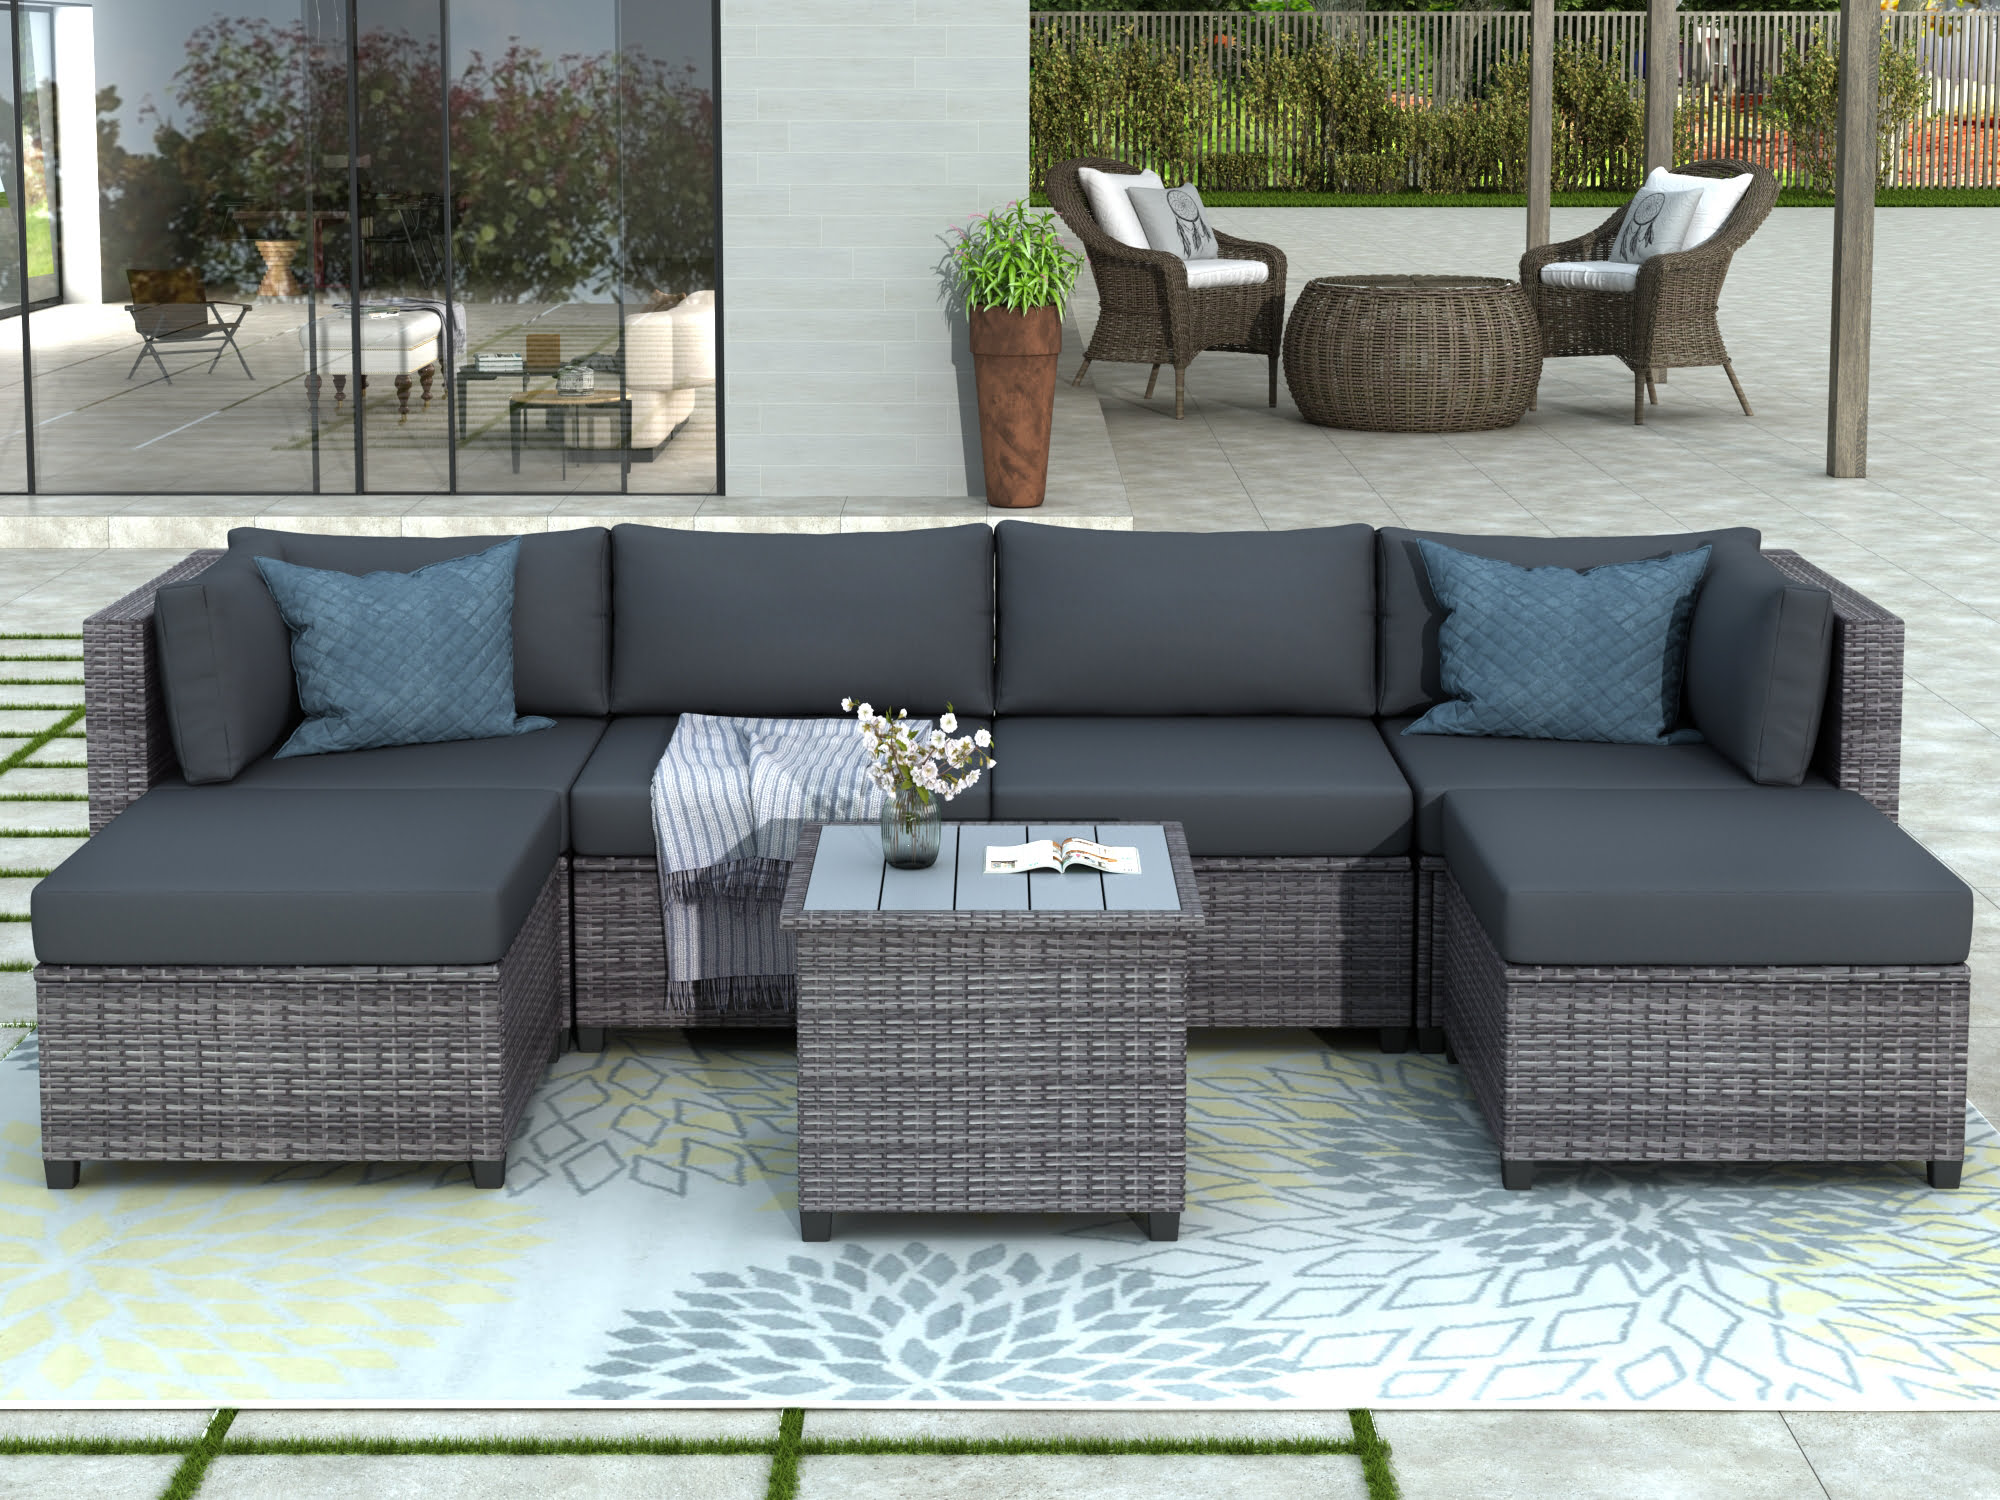 7 Piece Rattan Sectional Seating Group with Cushions - WY000307AAE